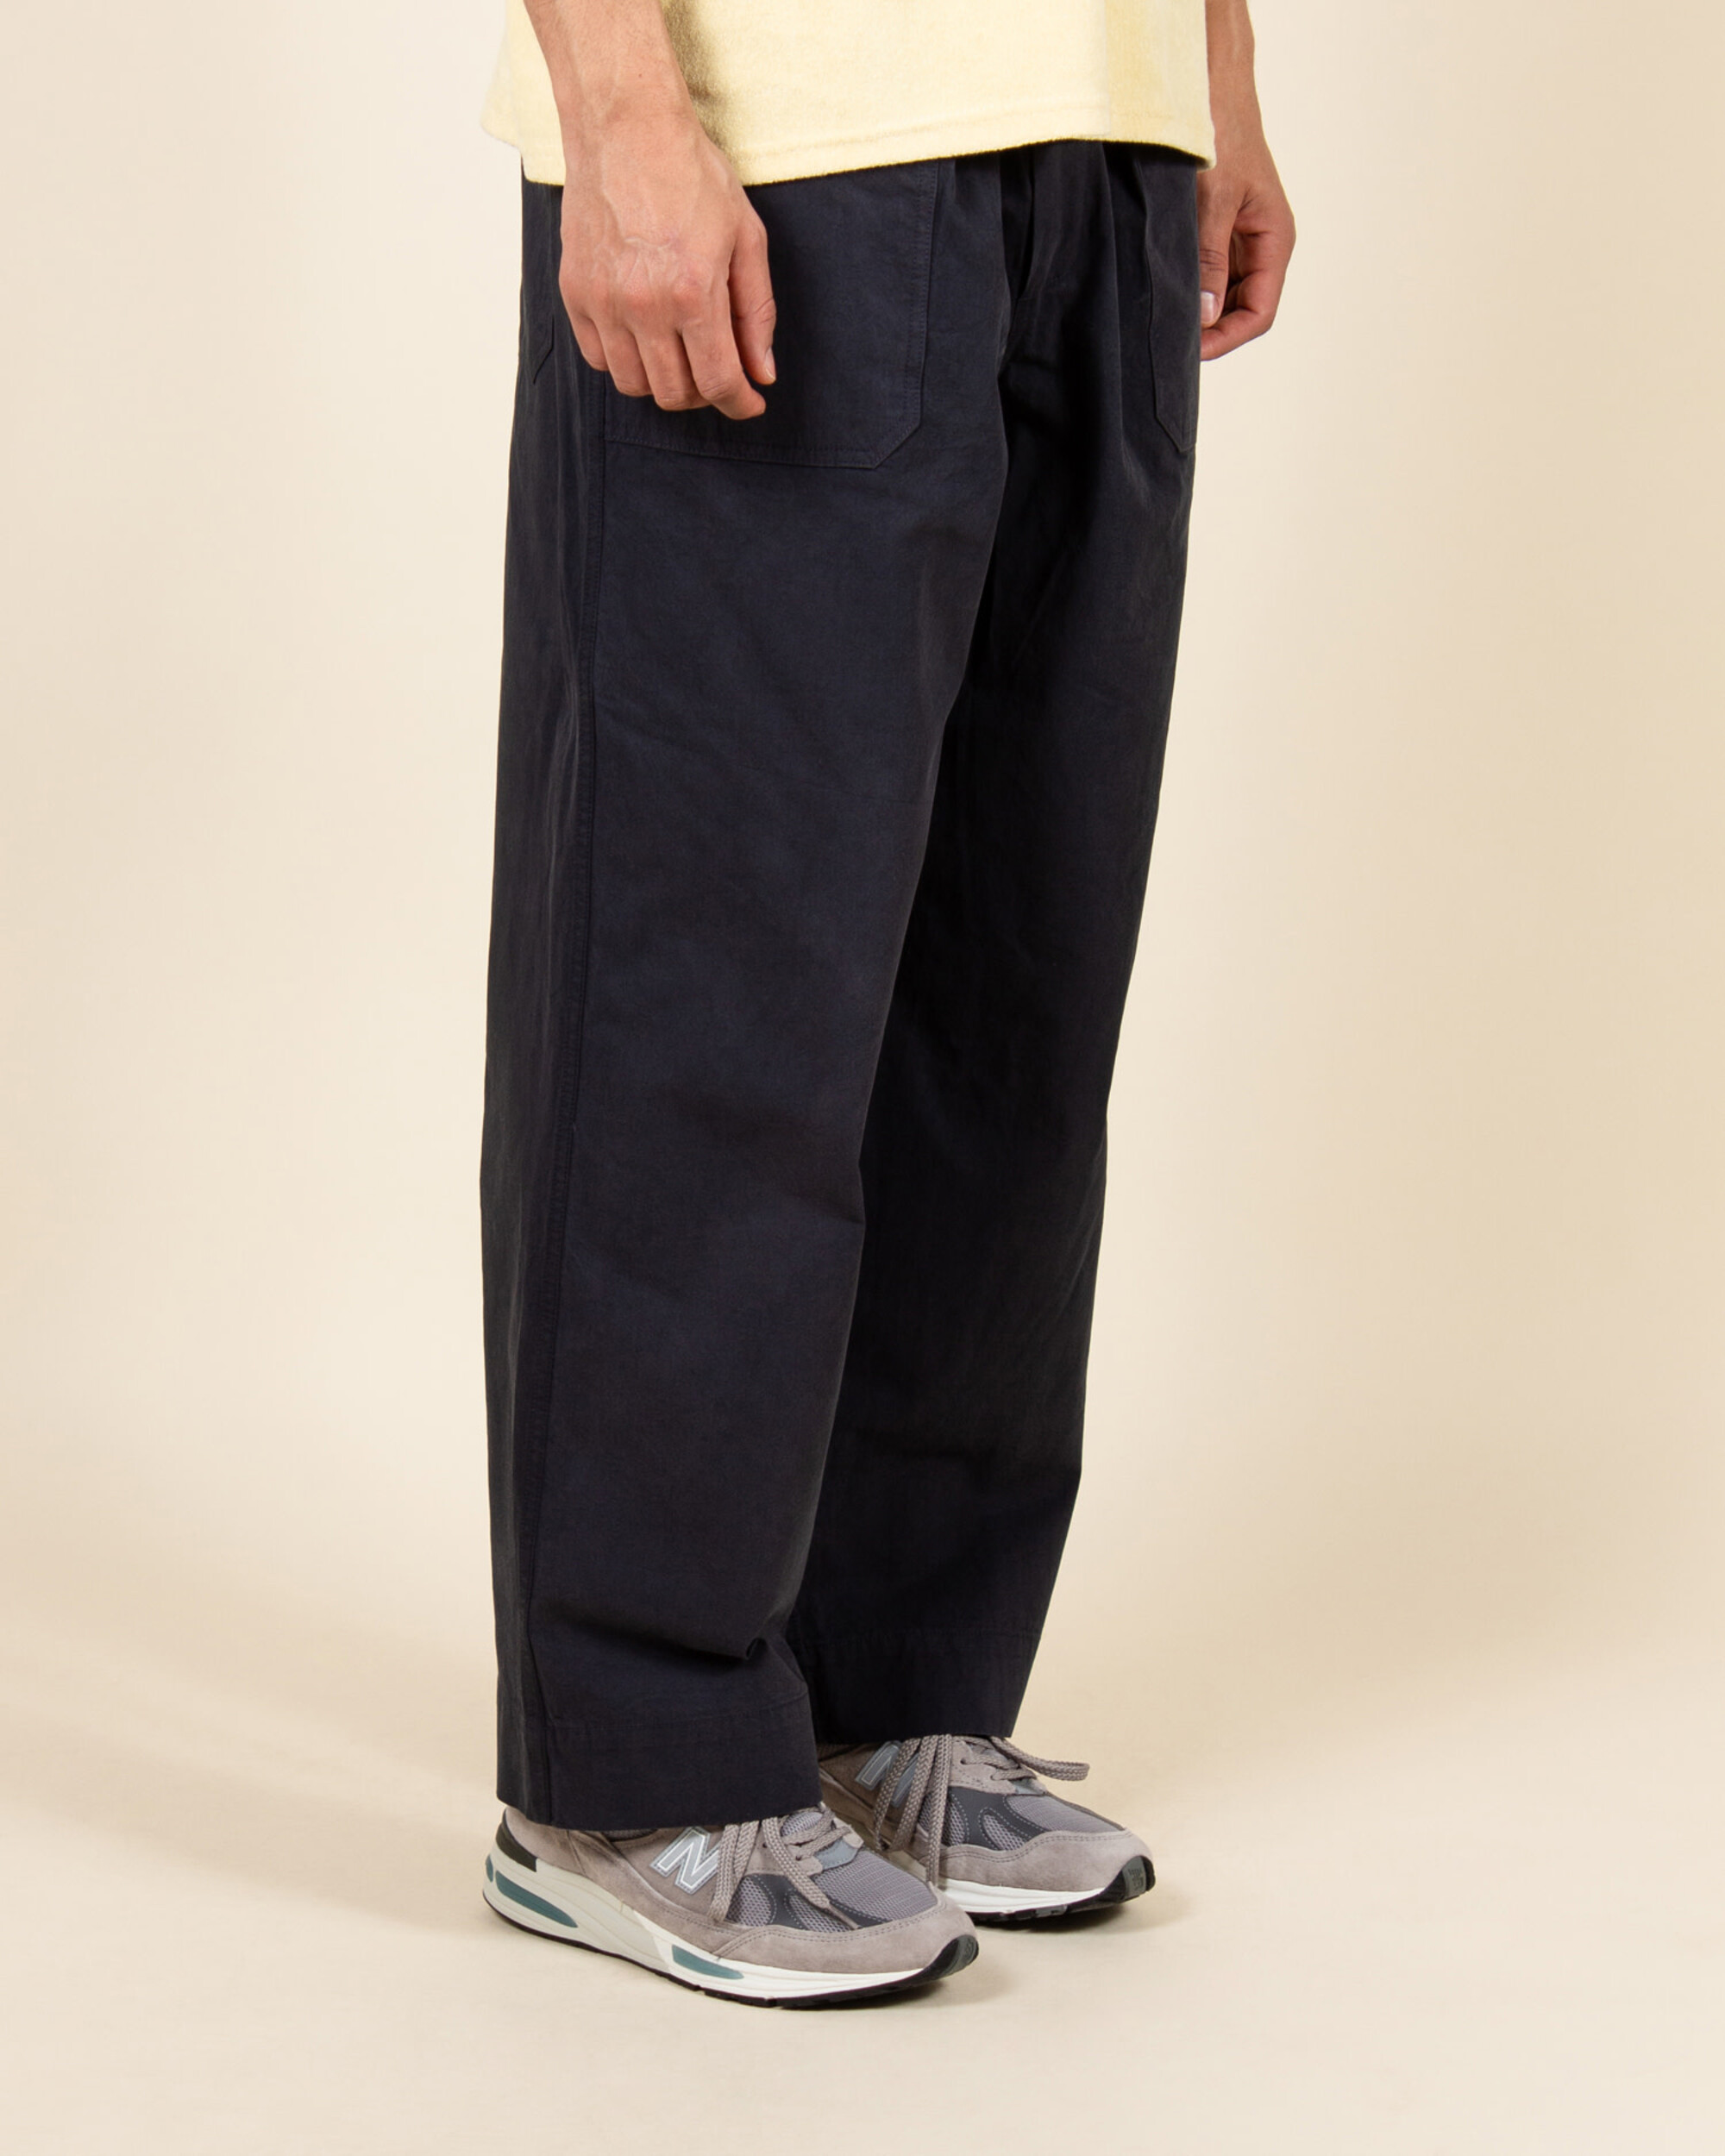 Kappy One Tuck Fatigue Pants - Navy